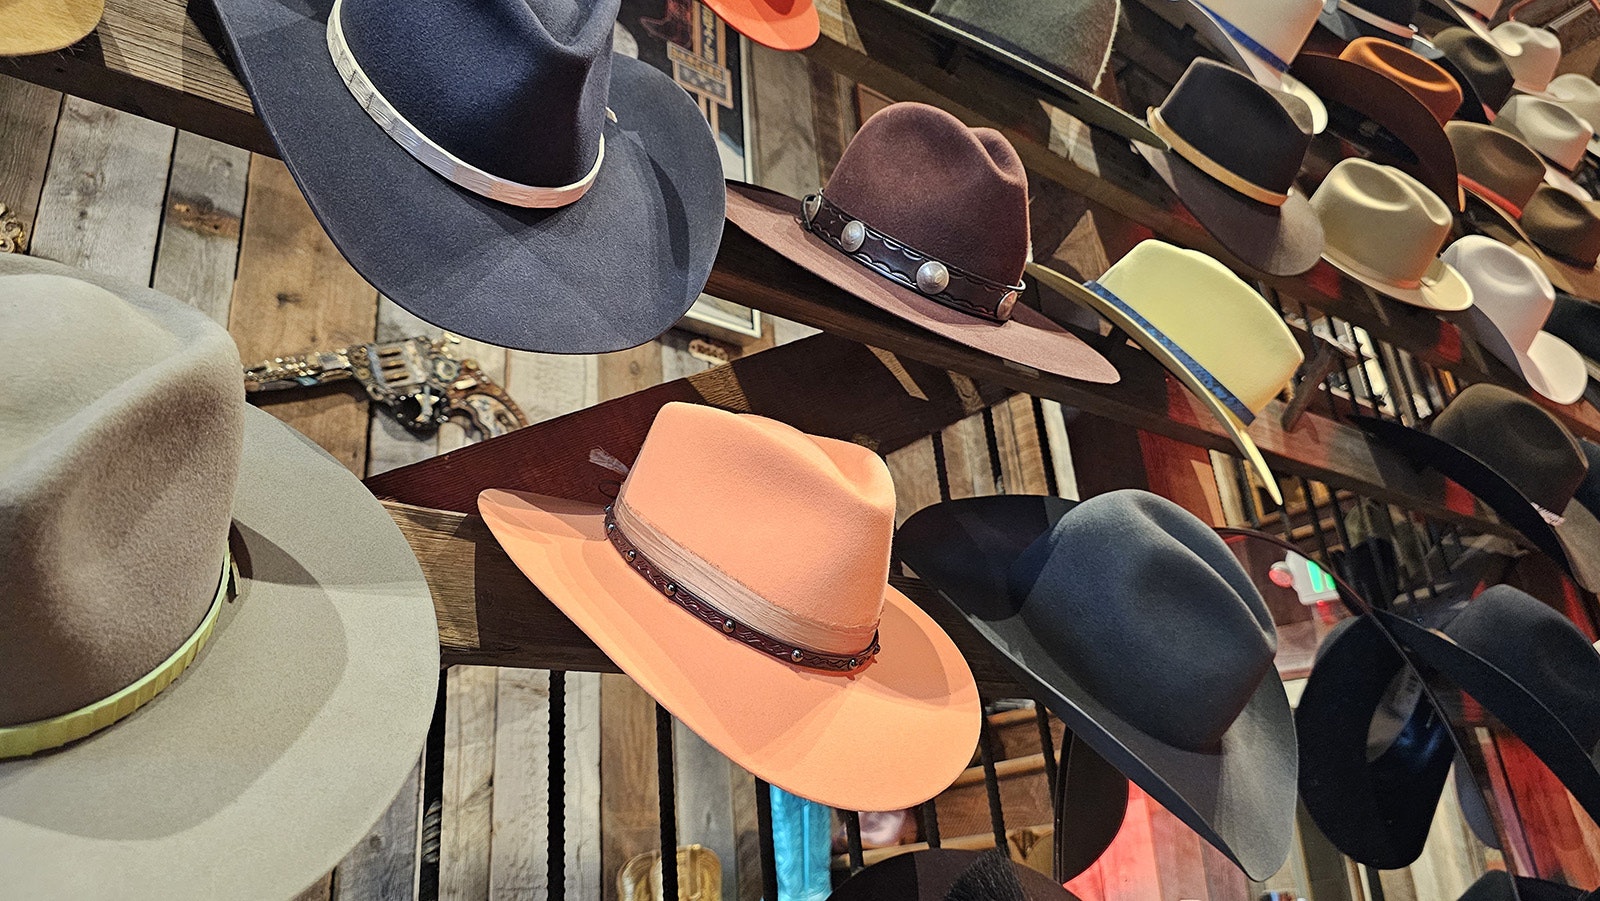 Kemo Sabe has dozens of hat styles to try on for size.